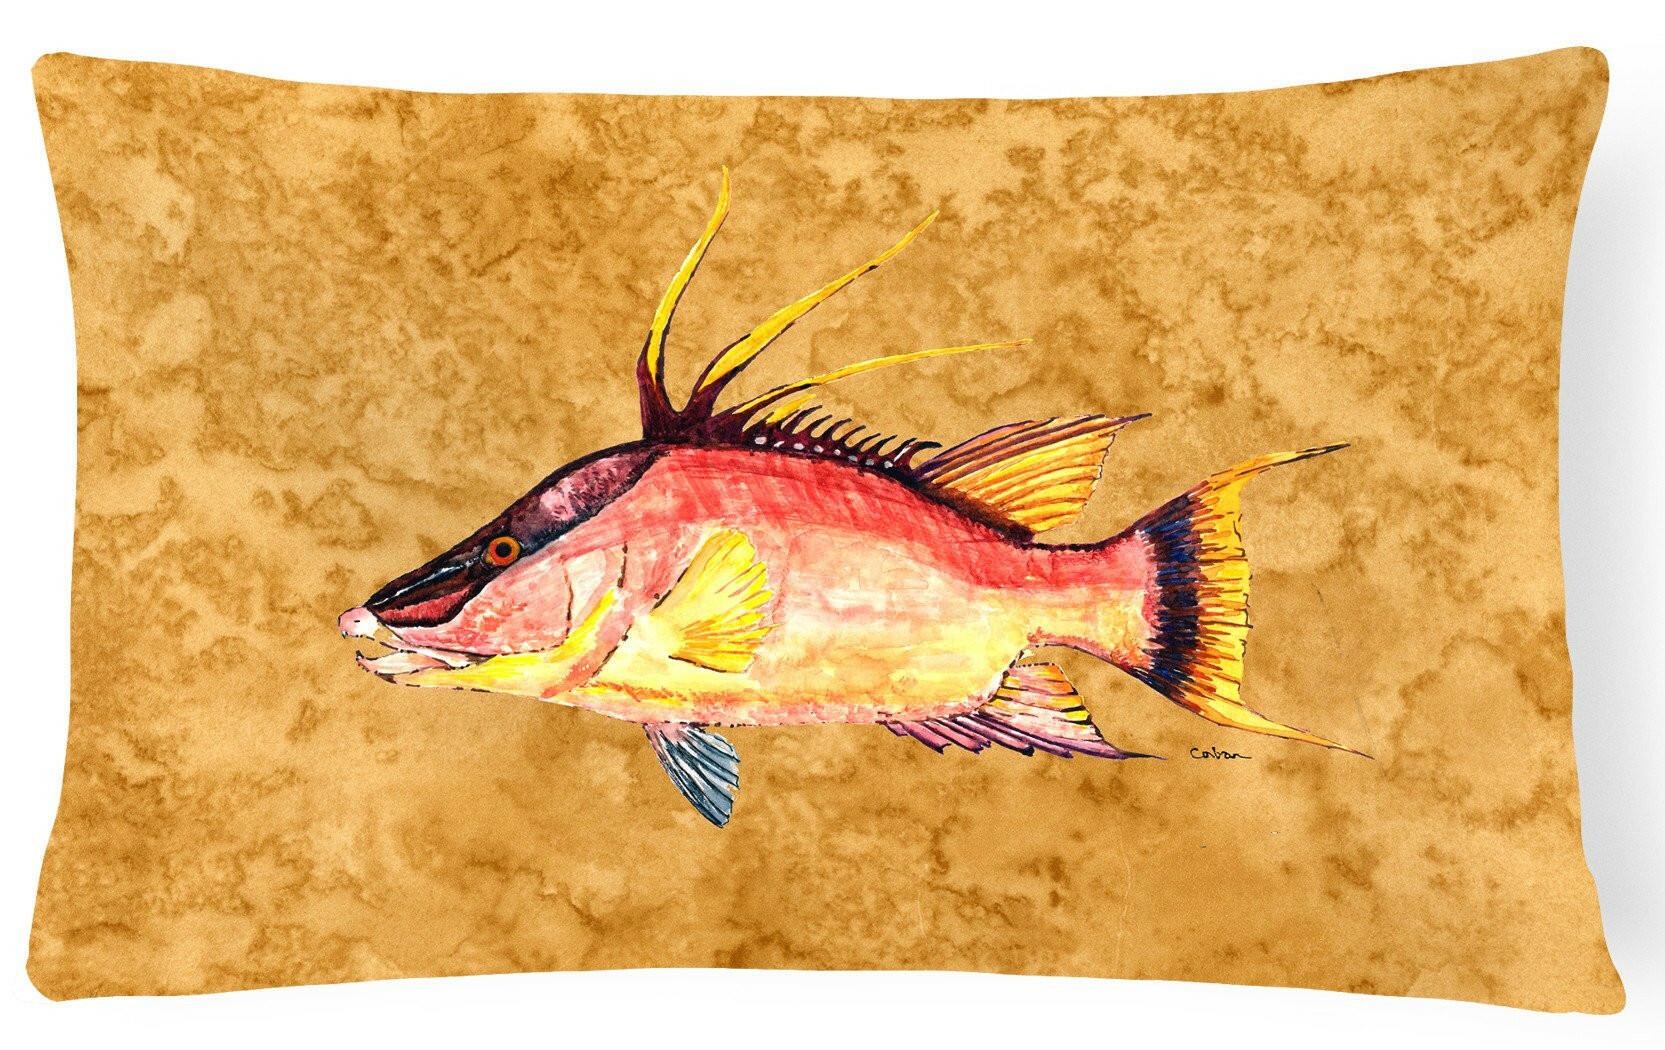 Hog Snapper on Gold Canvas Fabric Decorative Pillow 8751PW1216 by Caroline's Treasures